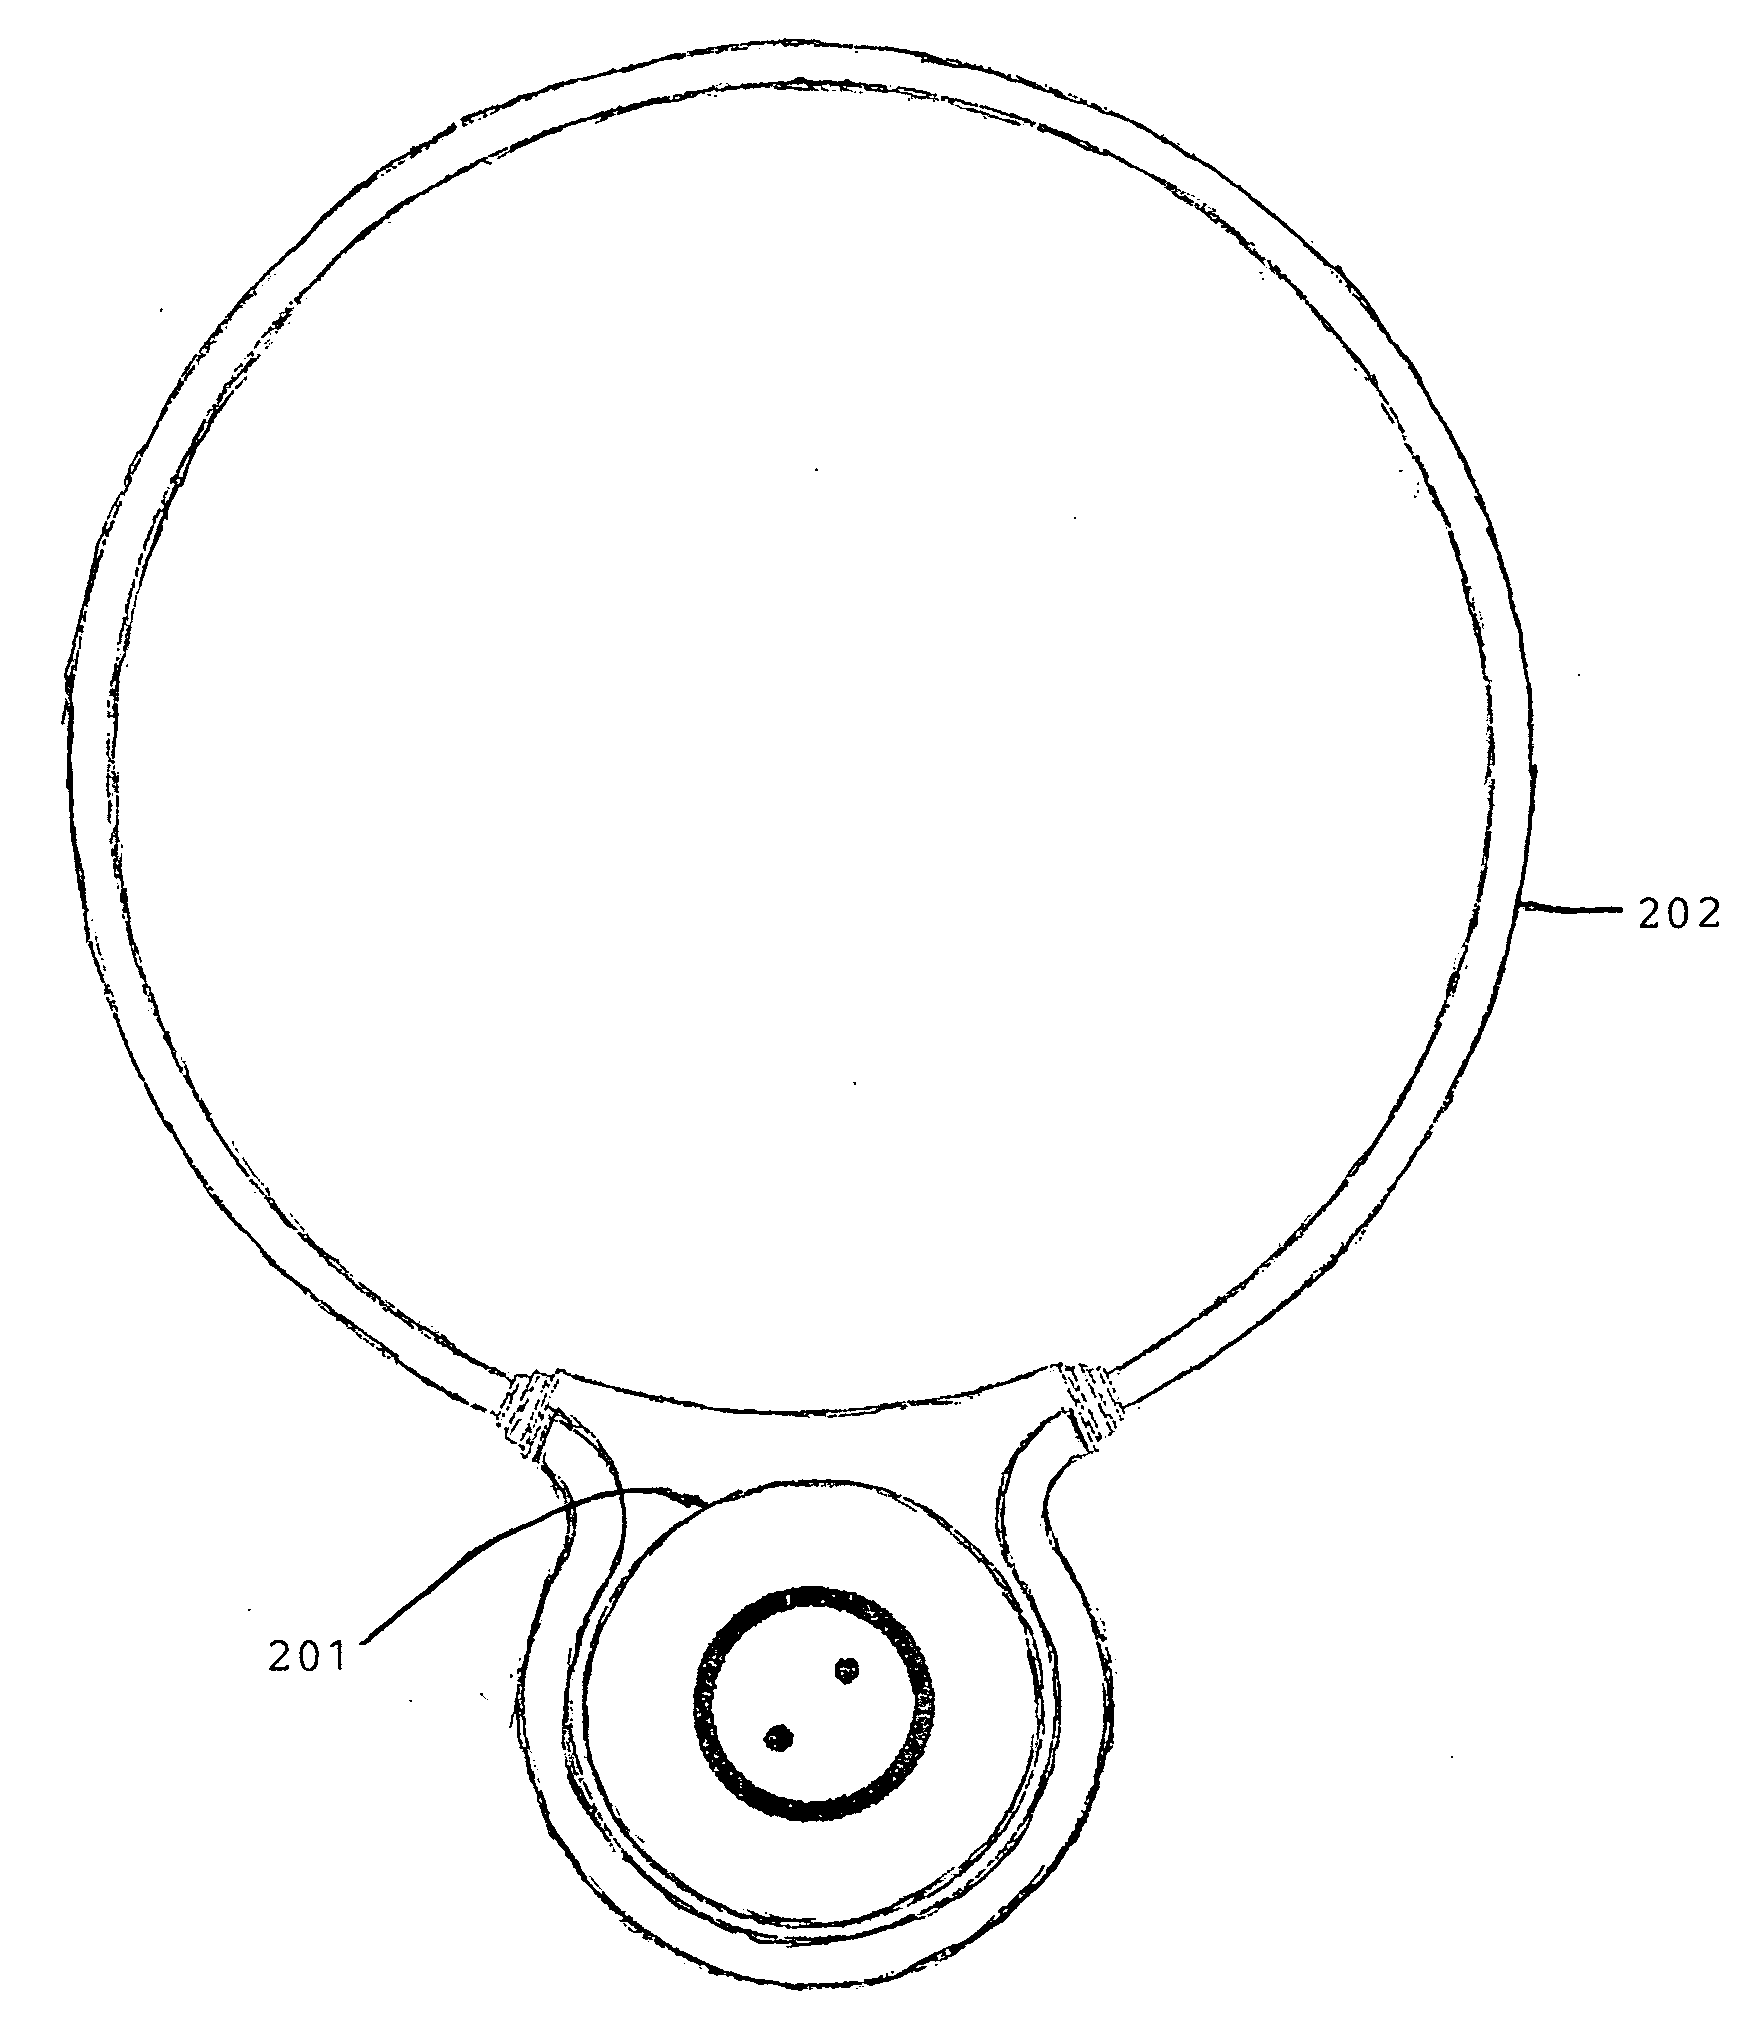 Electromagnetic apparatus for respiratory disease and method for using same